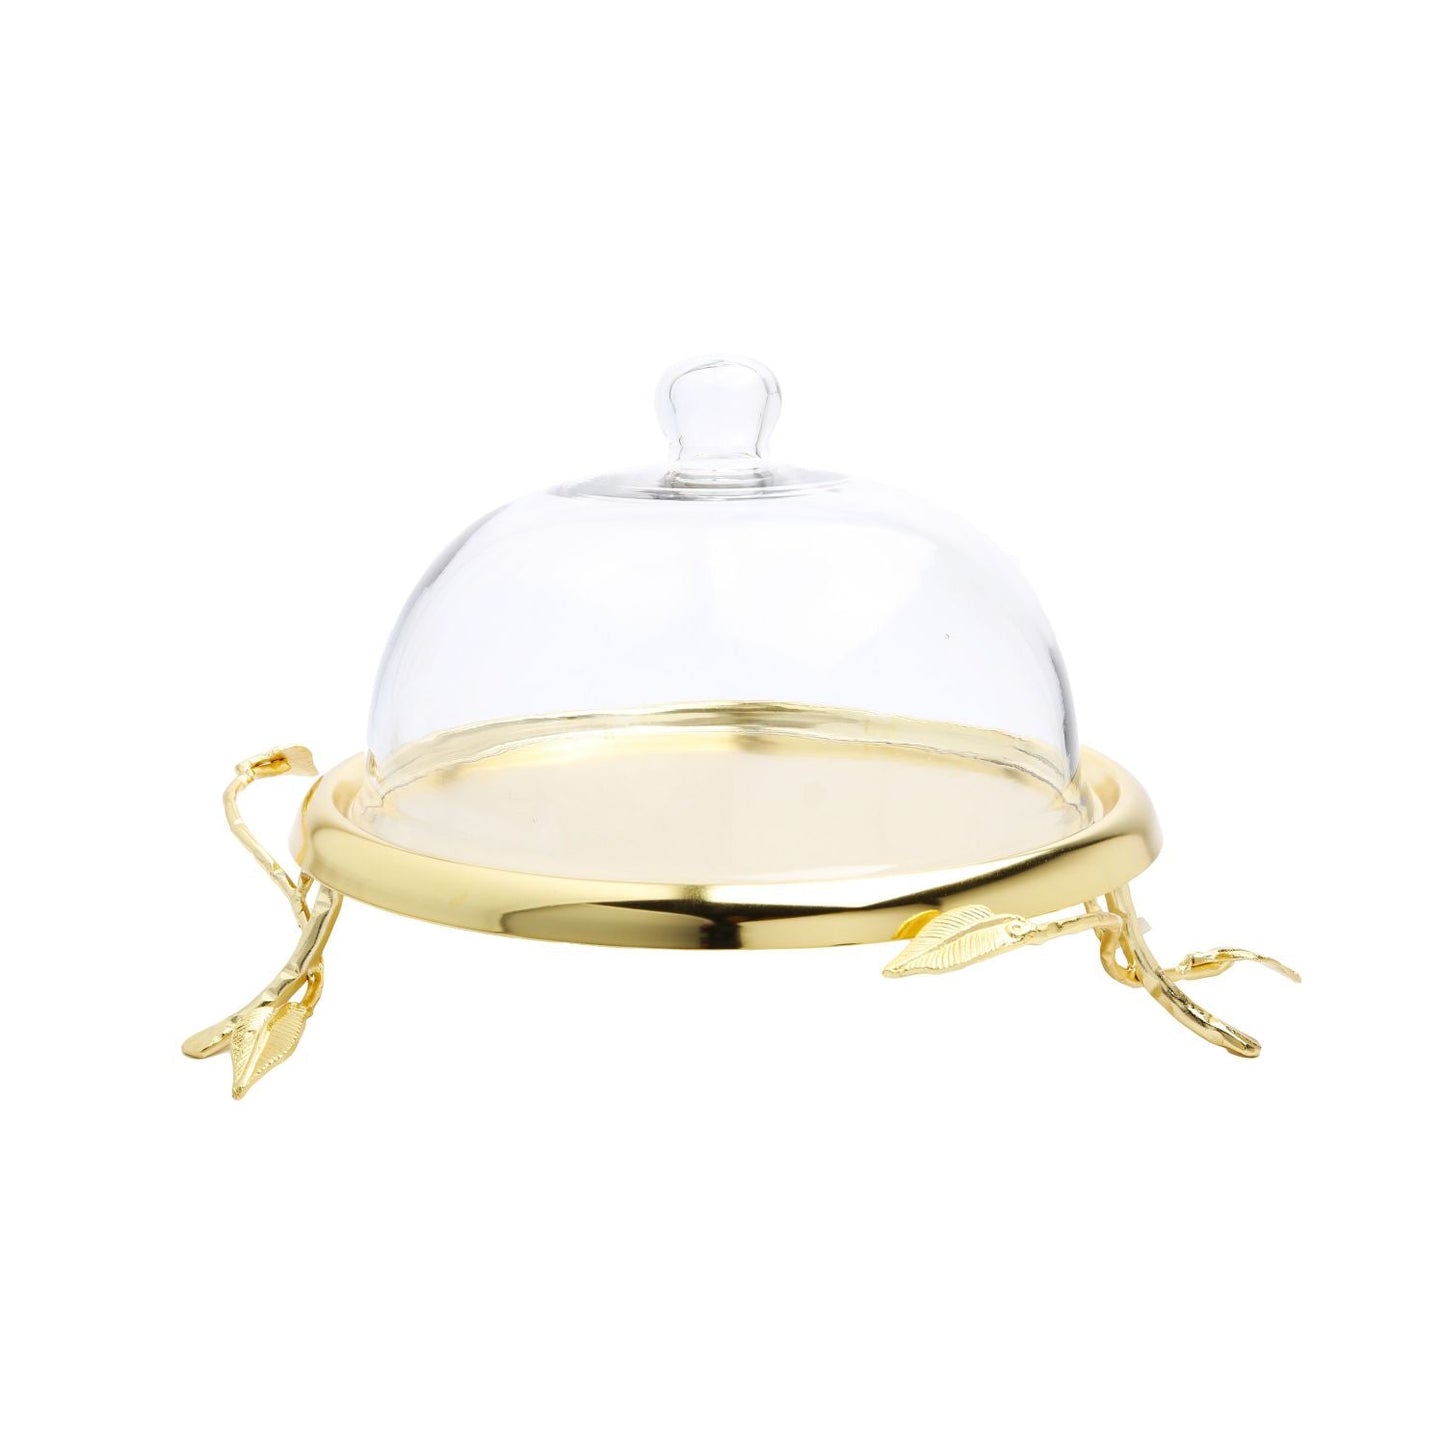 Classic Touch 10.5" Gold Leaf Cake Plate With Glass Dome